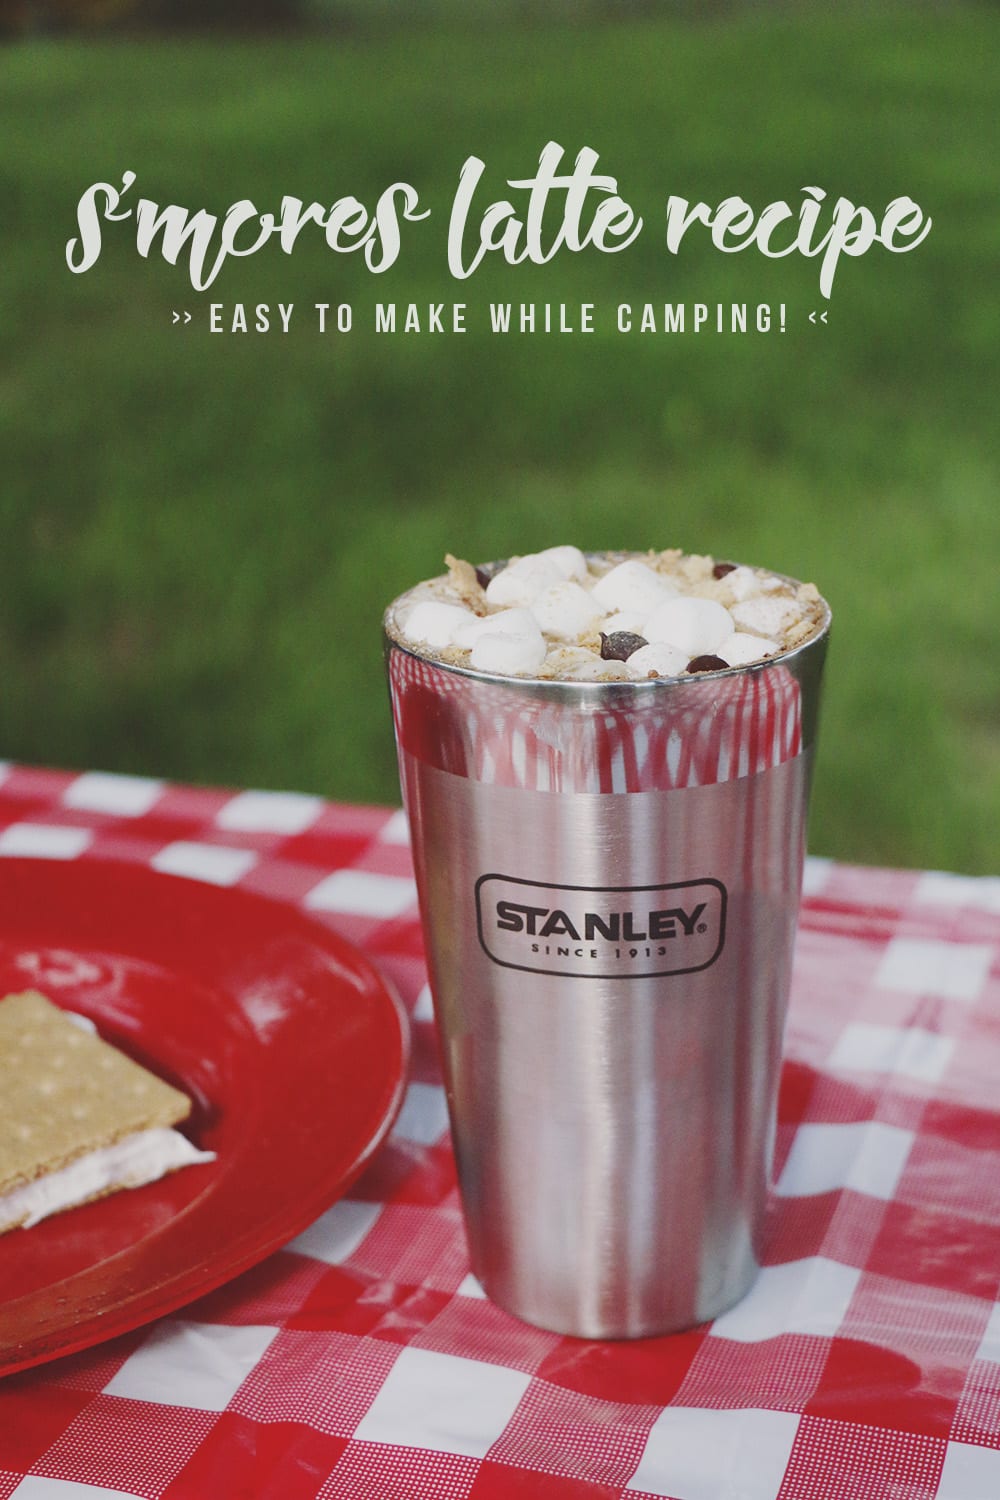 If you're in need of the perfect drink whether you're enjoying your campsite or at home wishing you were outdoors, this S'mores Latte recipe is it!